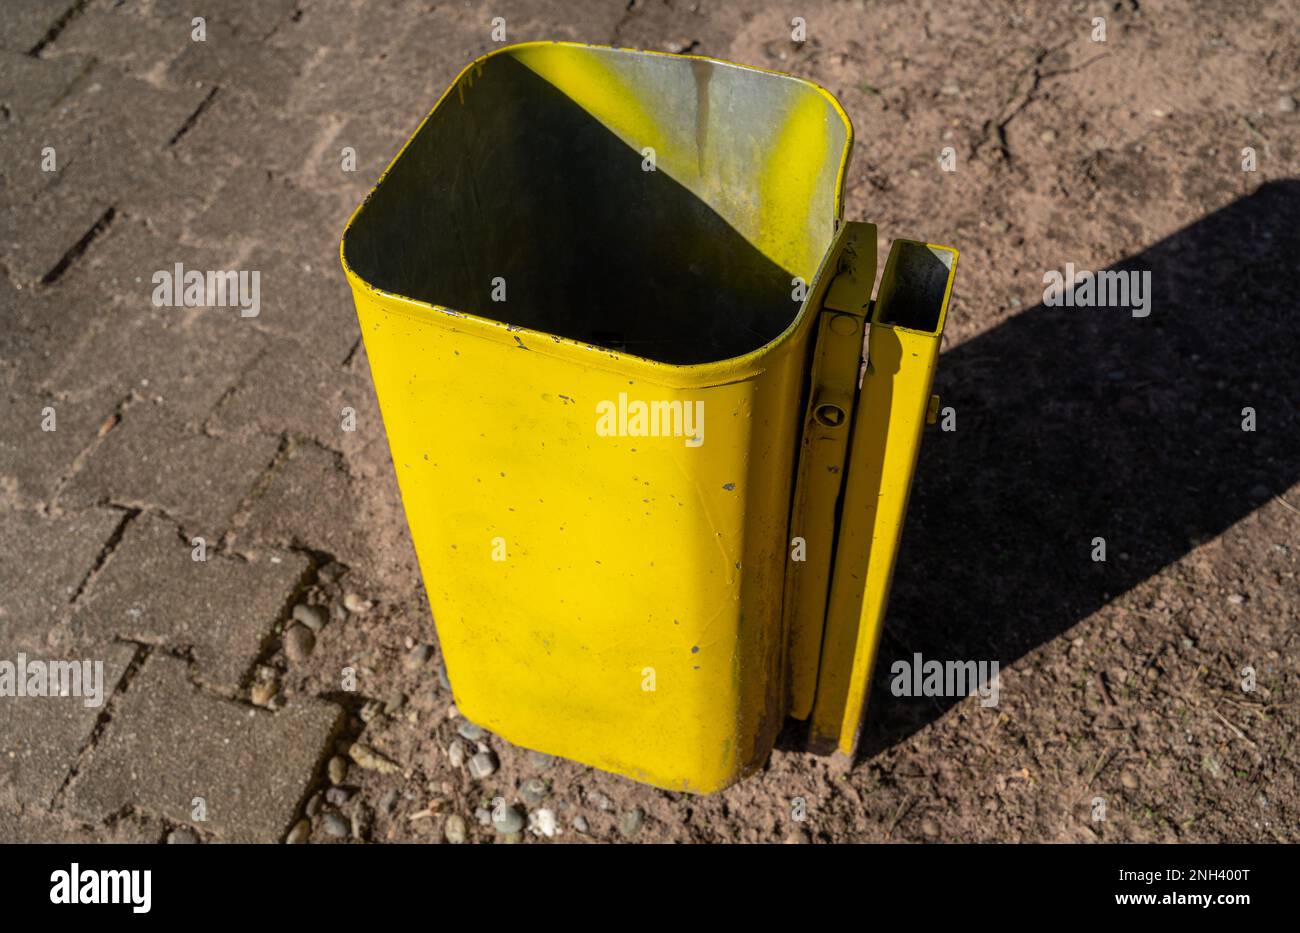 Square yellow trash can in the park Stock Photo